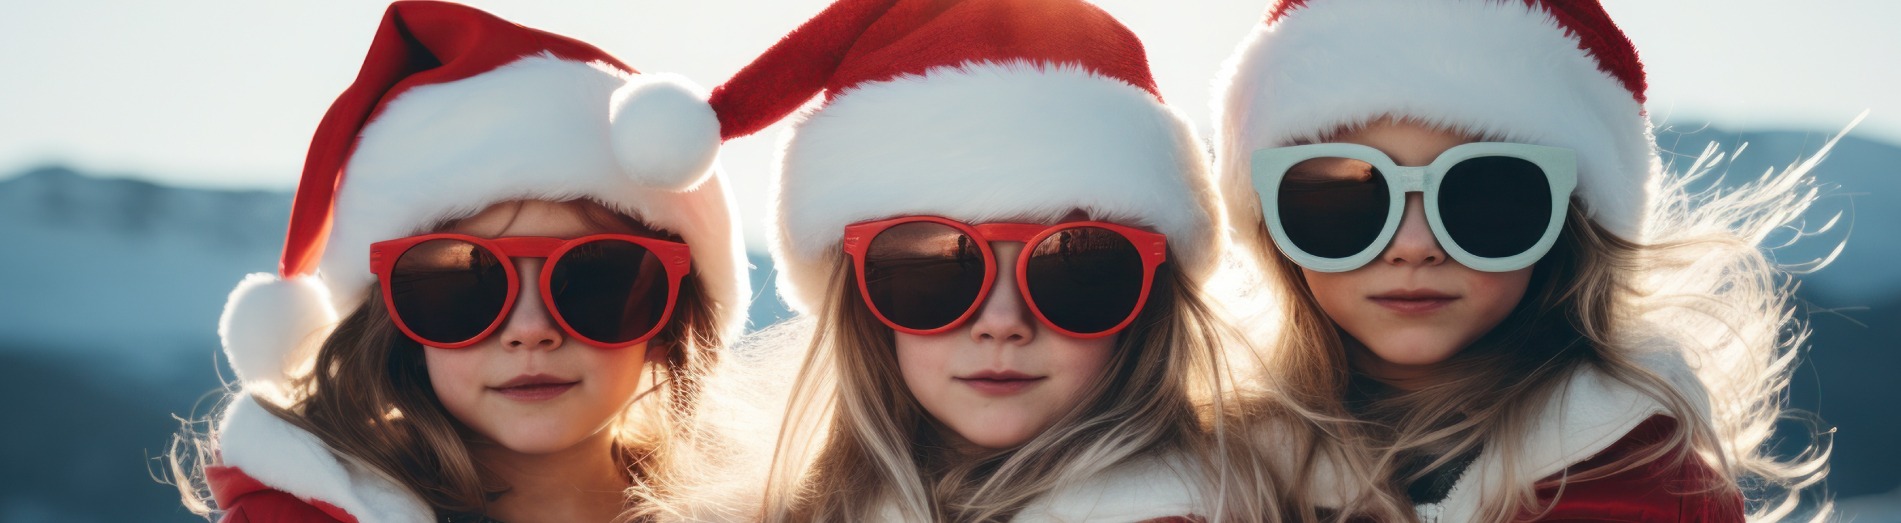 Dew Aesthetics, Chester | Threadlifts, IPL Laser Hair Removal, Skincare | Three girls in sunglasses and Santa hats